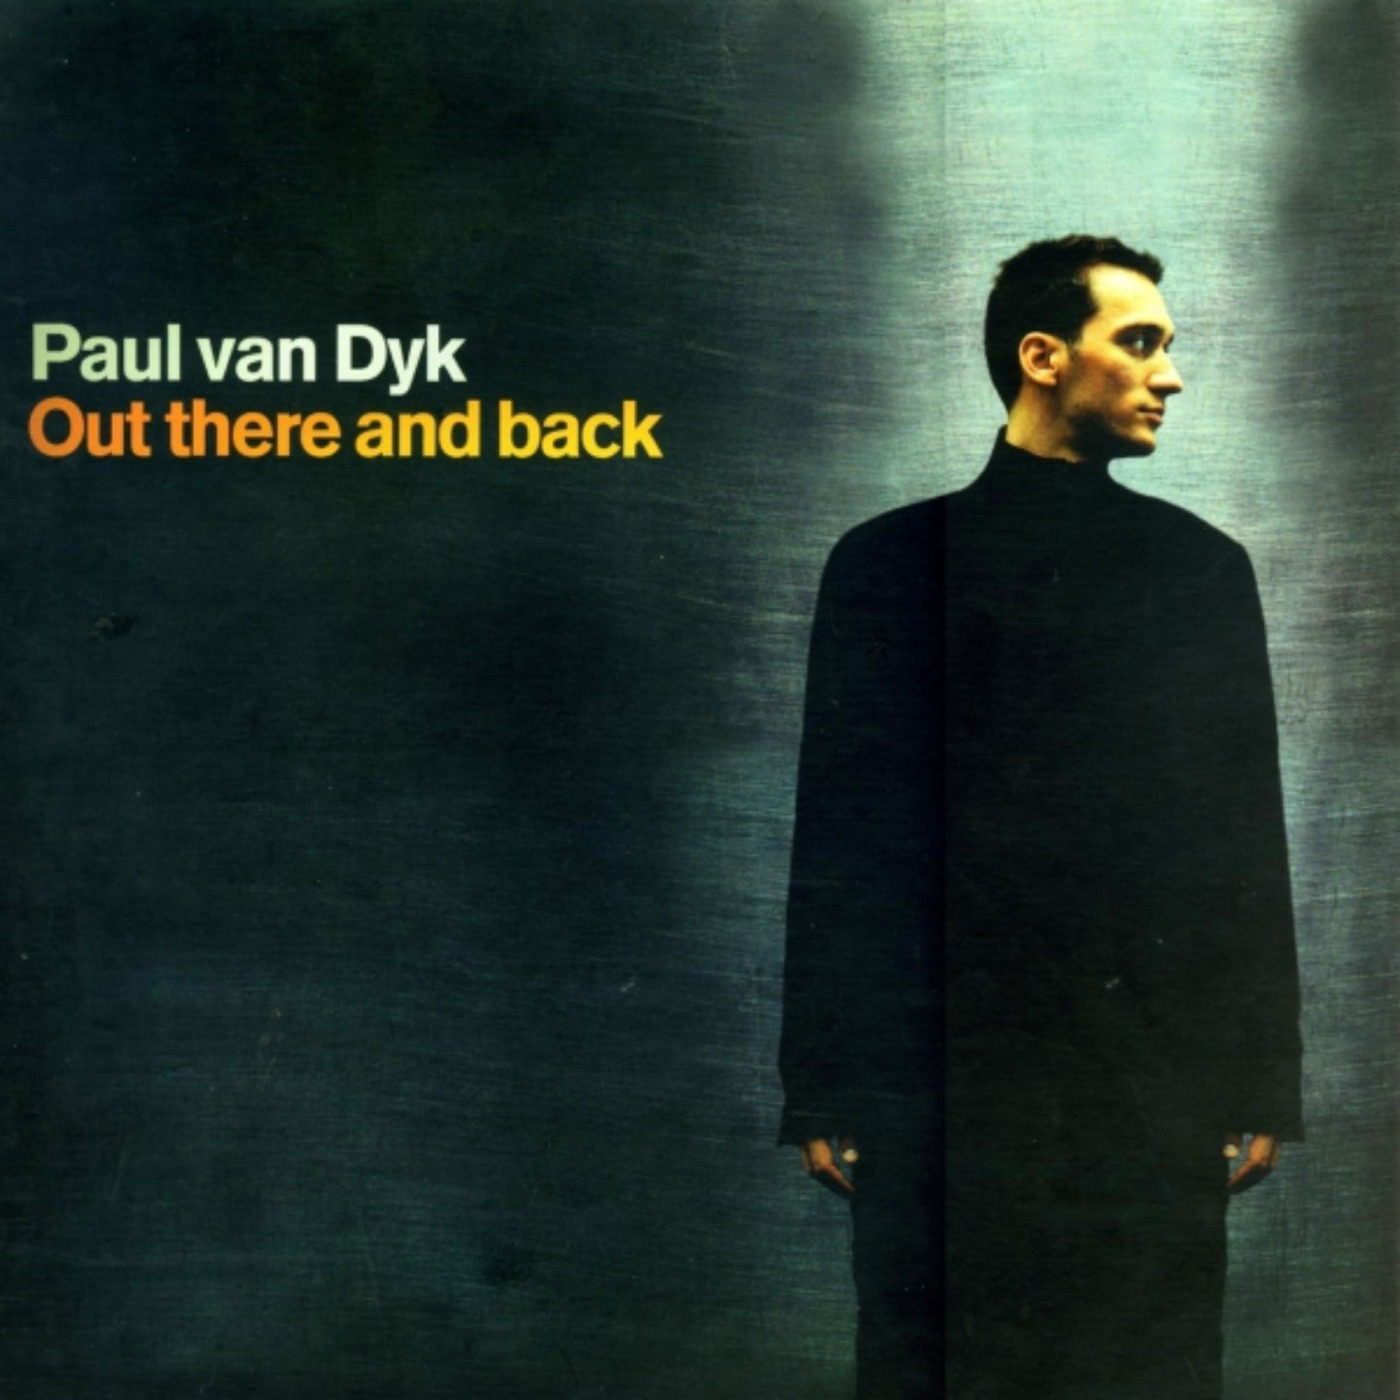 Out There and Back by Paul van Dyk